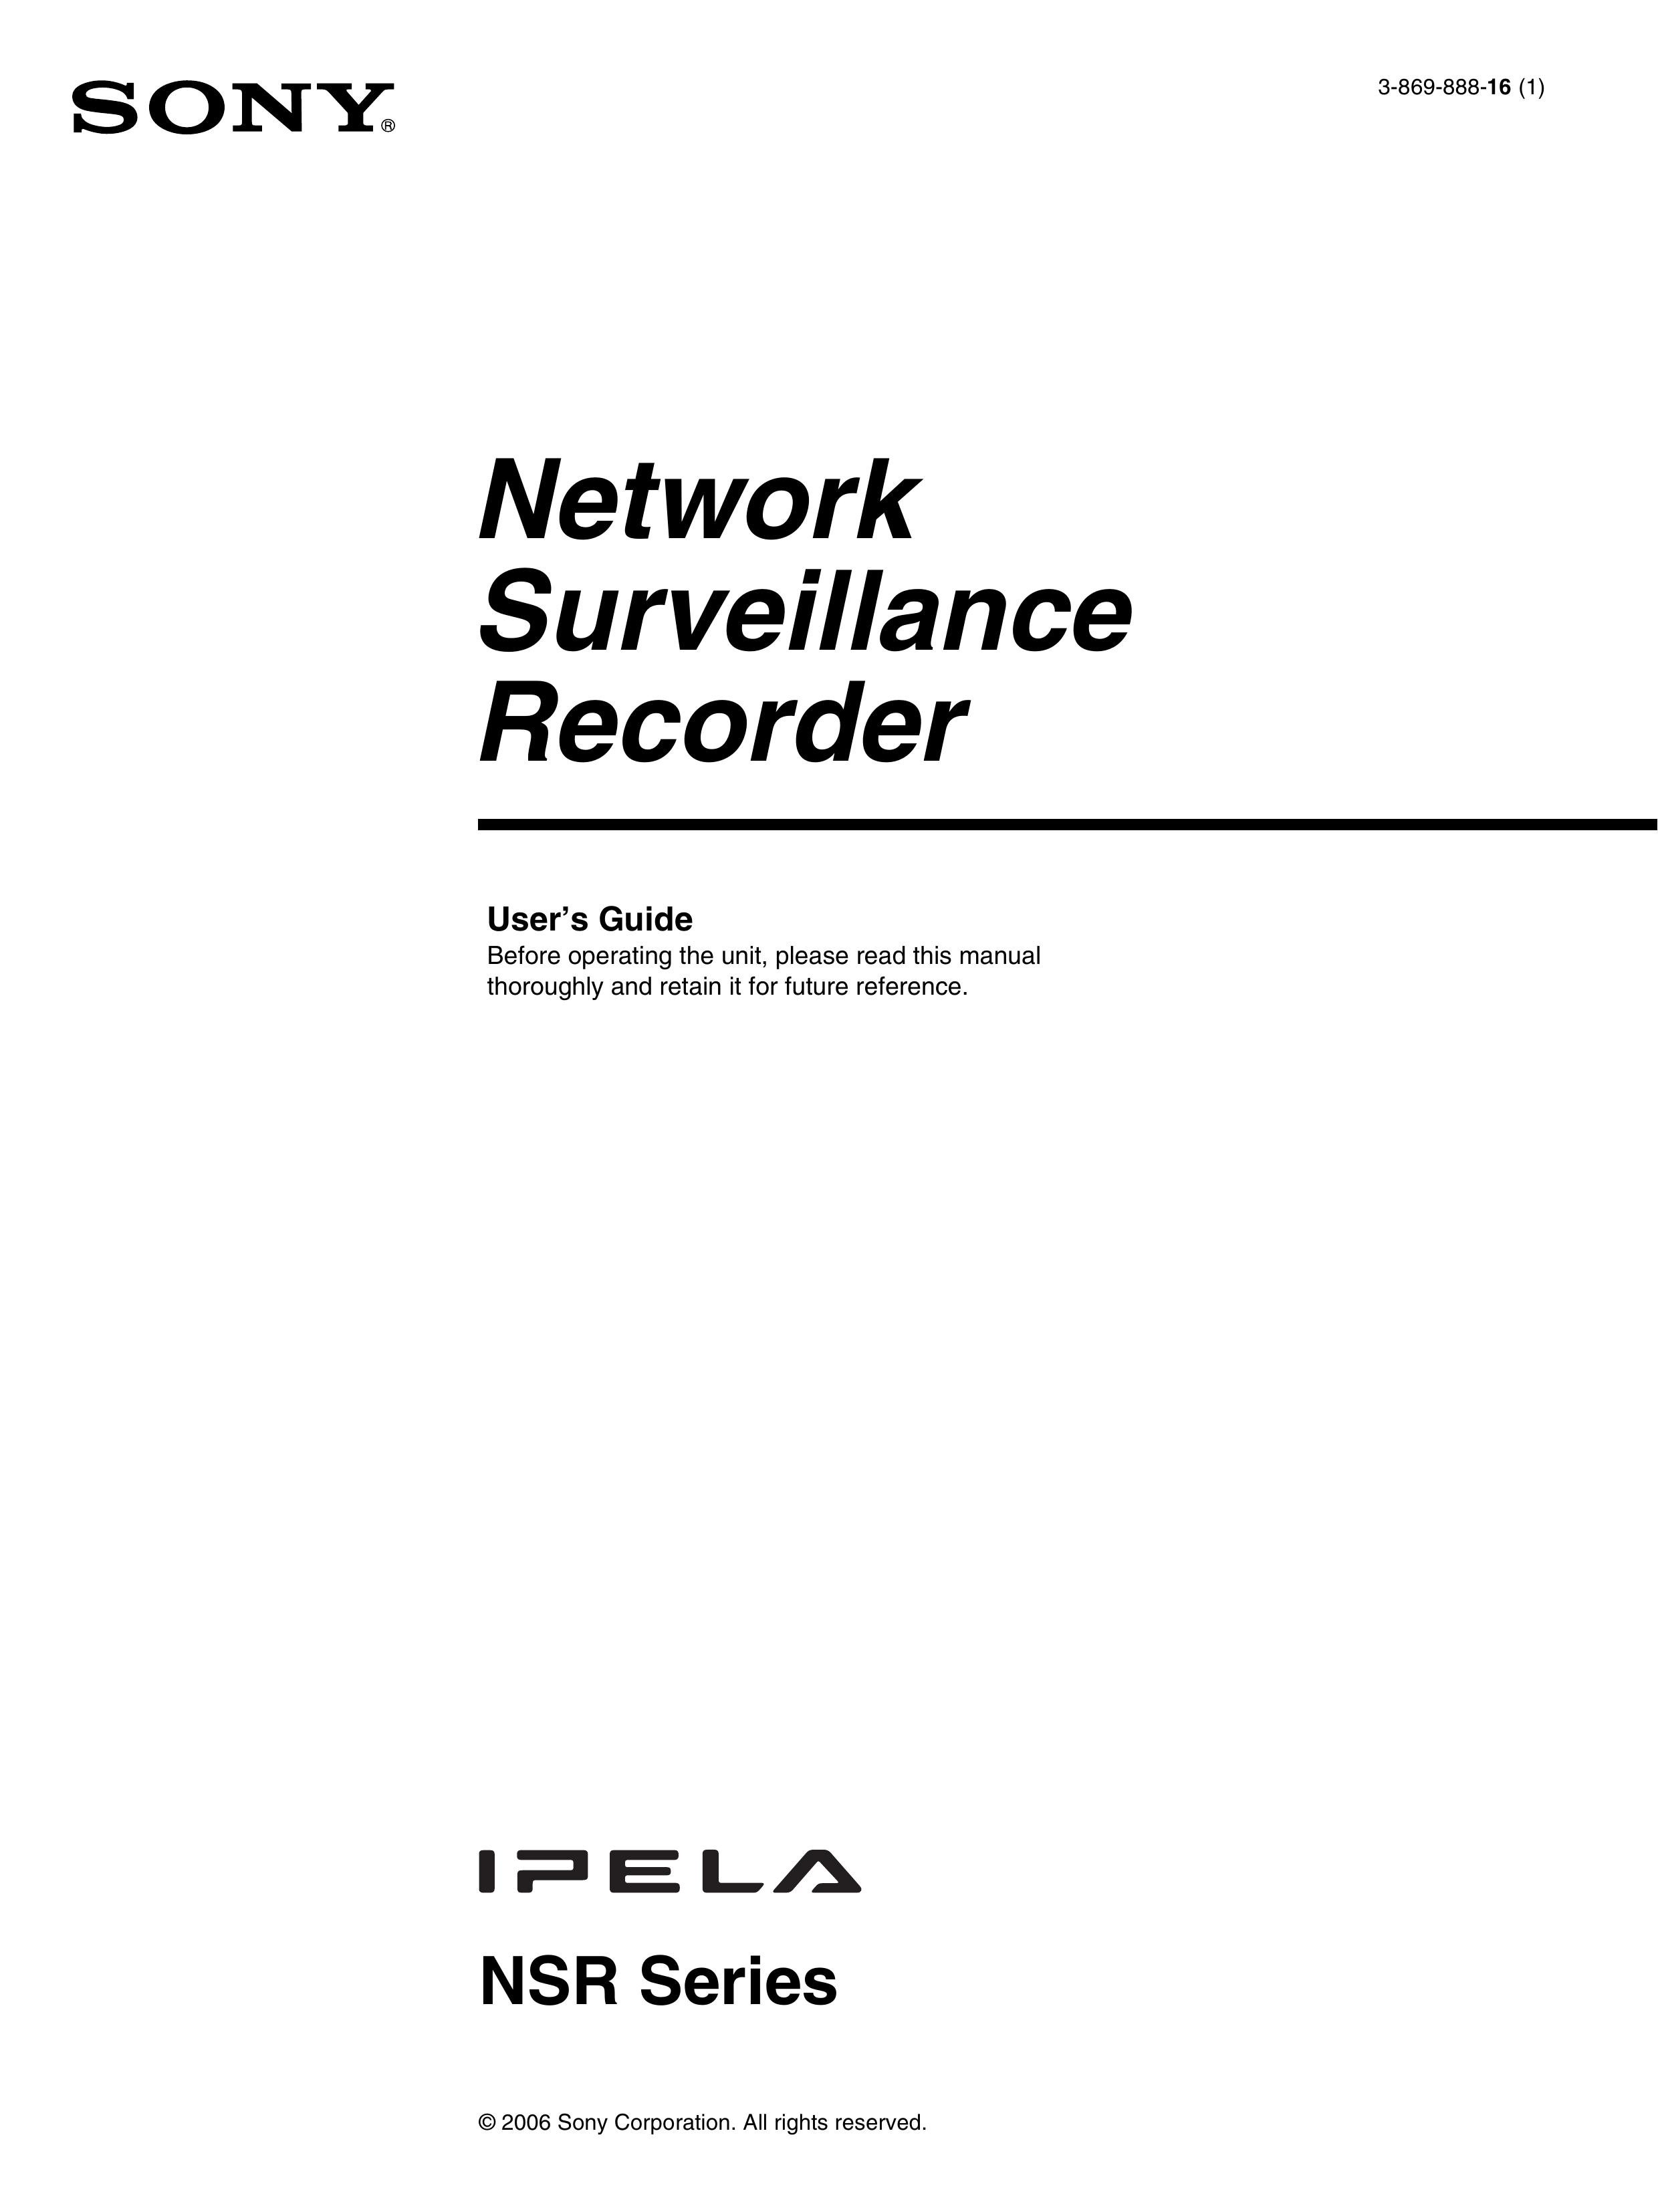 Sony NSR Series Security Camera User Manual